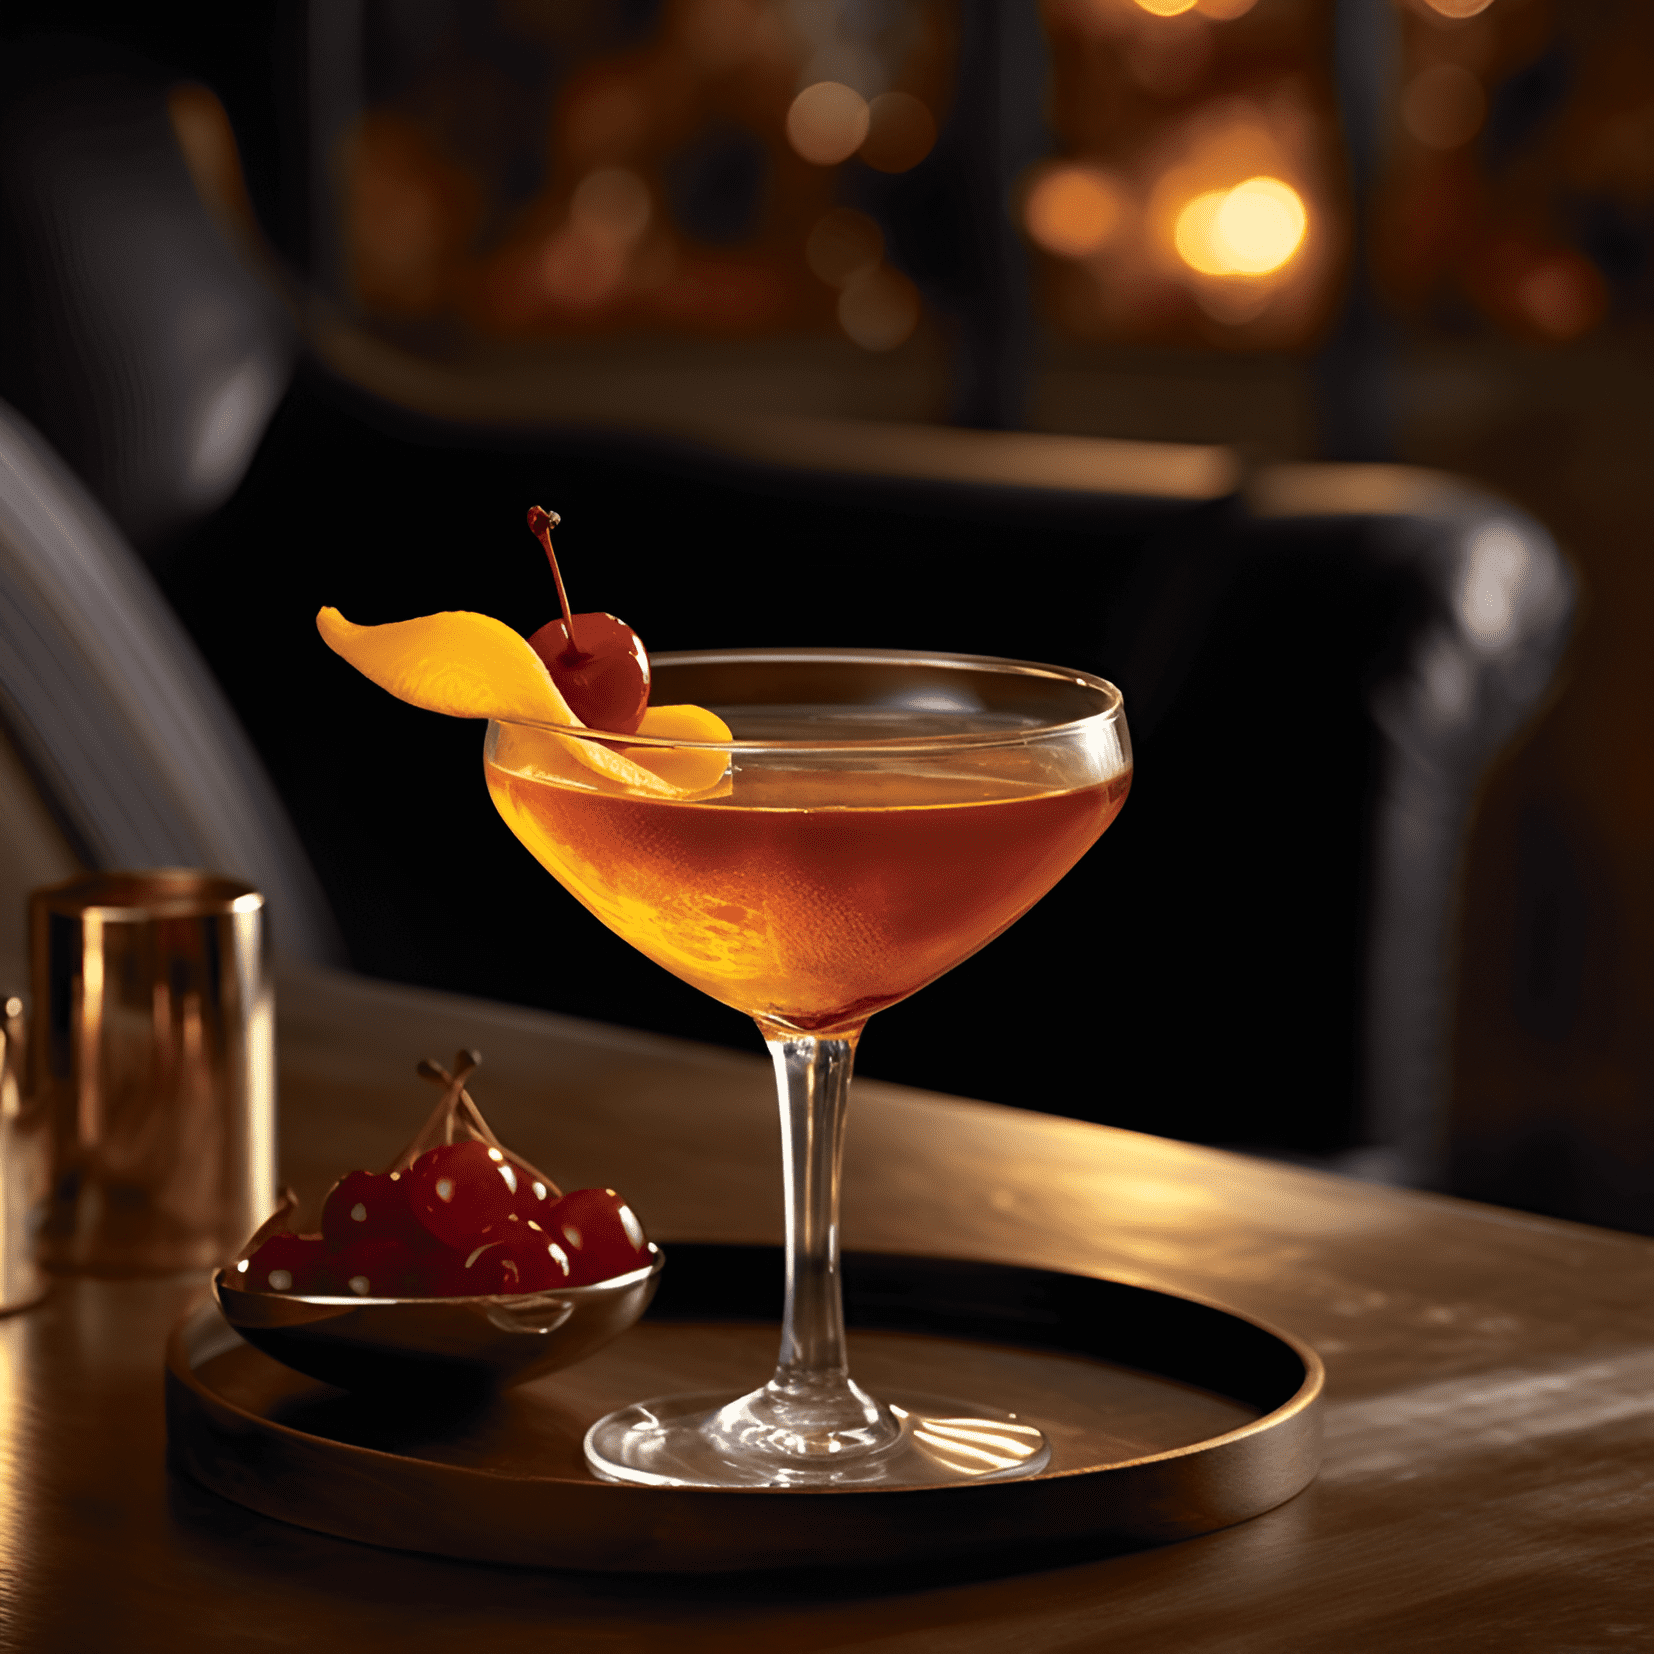 Lone Tree Cocktail Recipe - The Lone Tree cocktail is a well-balanced mix of sweet, sour, and bitter flavors. It has a smooth, velvety texture with a hint of citrus and herbal notes. The drink is medium-bodied, with a pleasant warmth from the alcohol and a lingering, slightly bitter aftertaste.